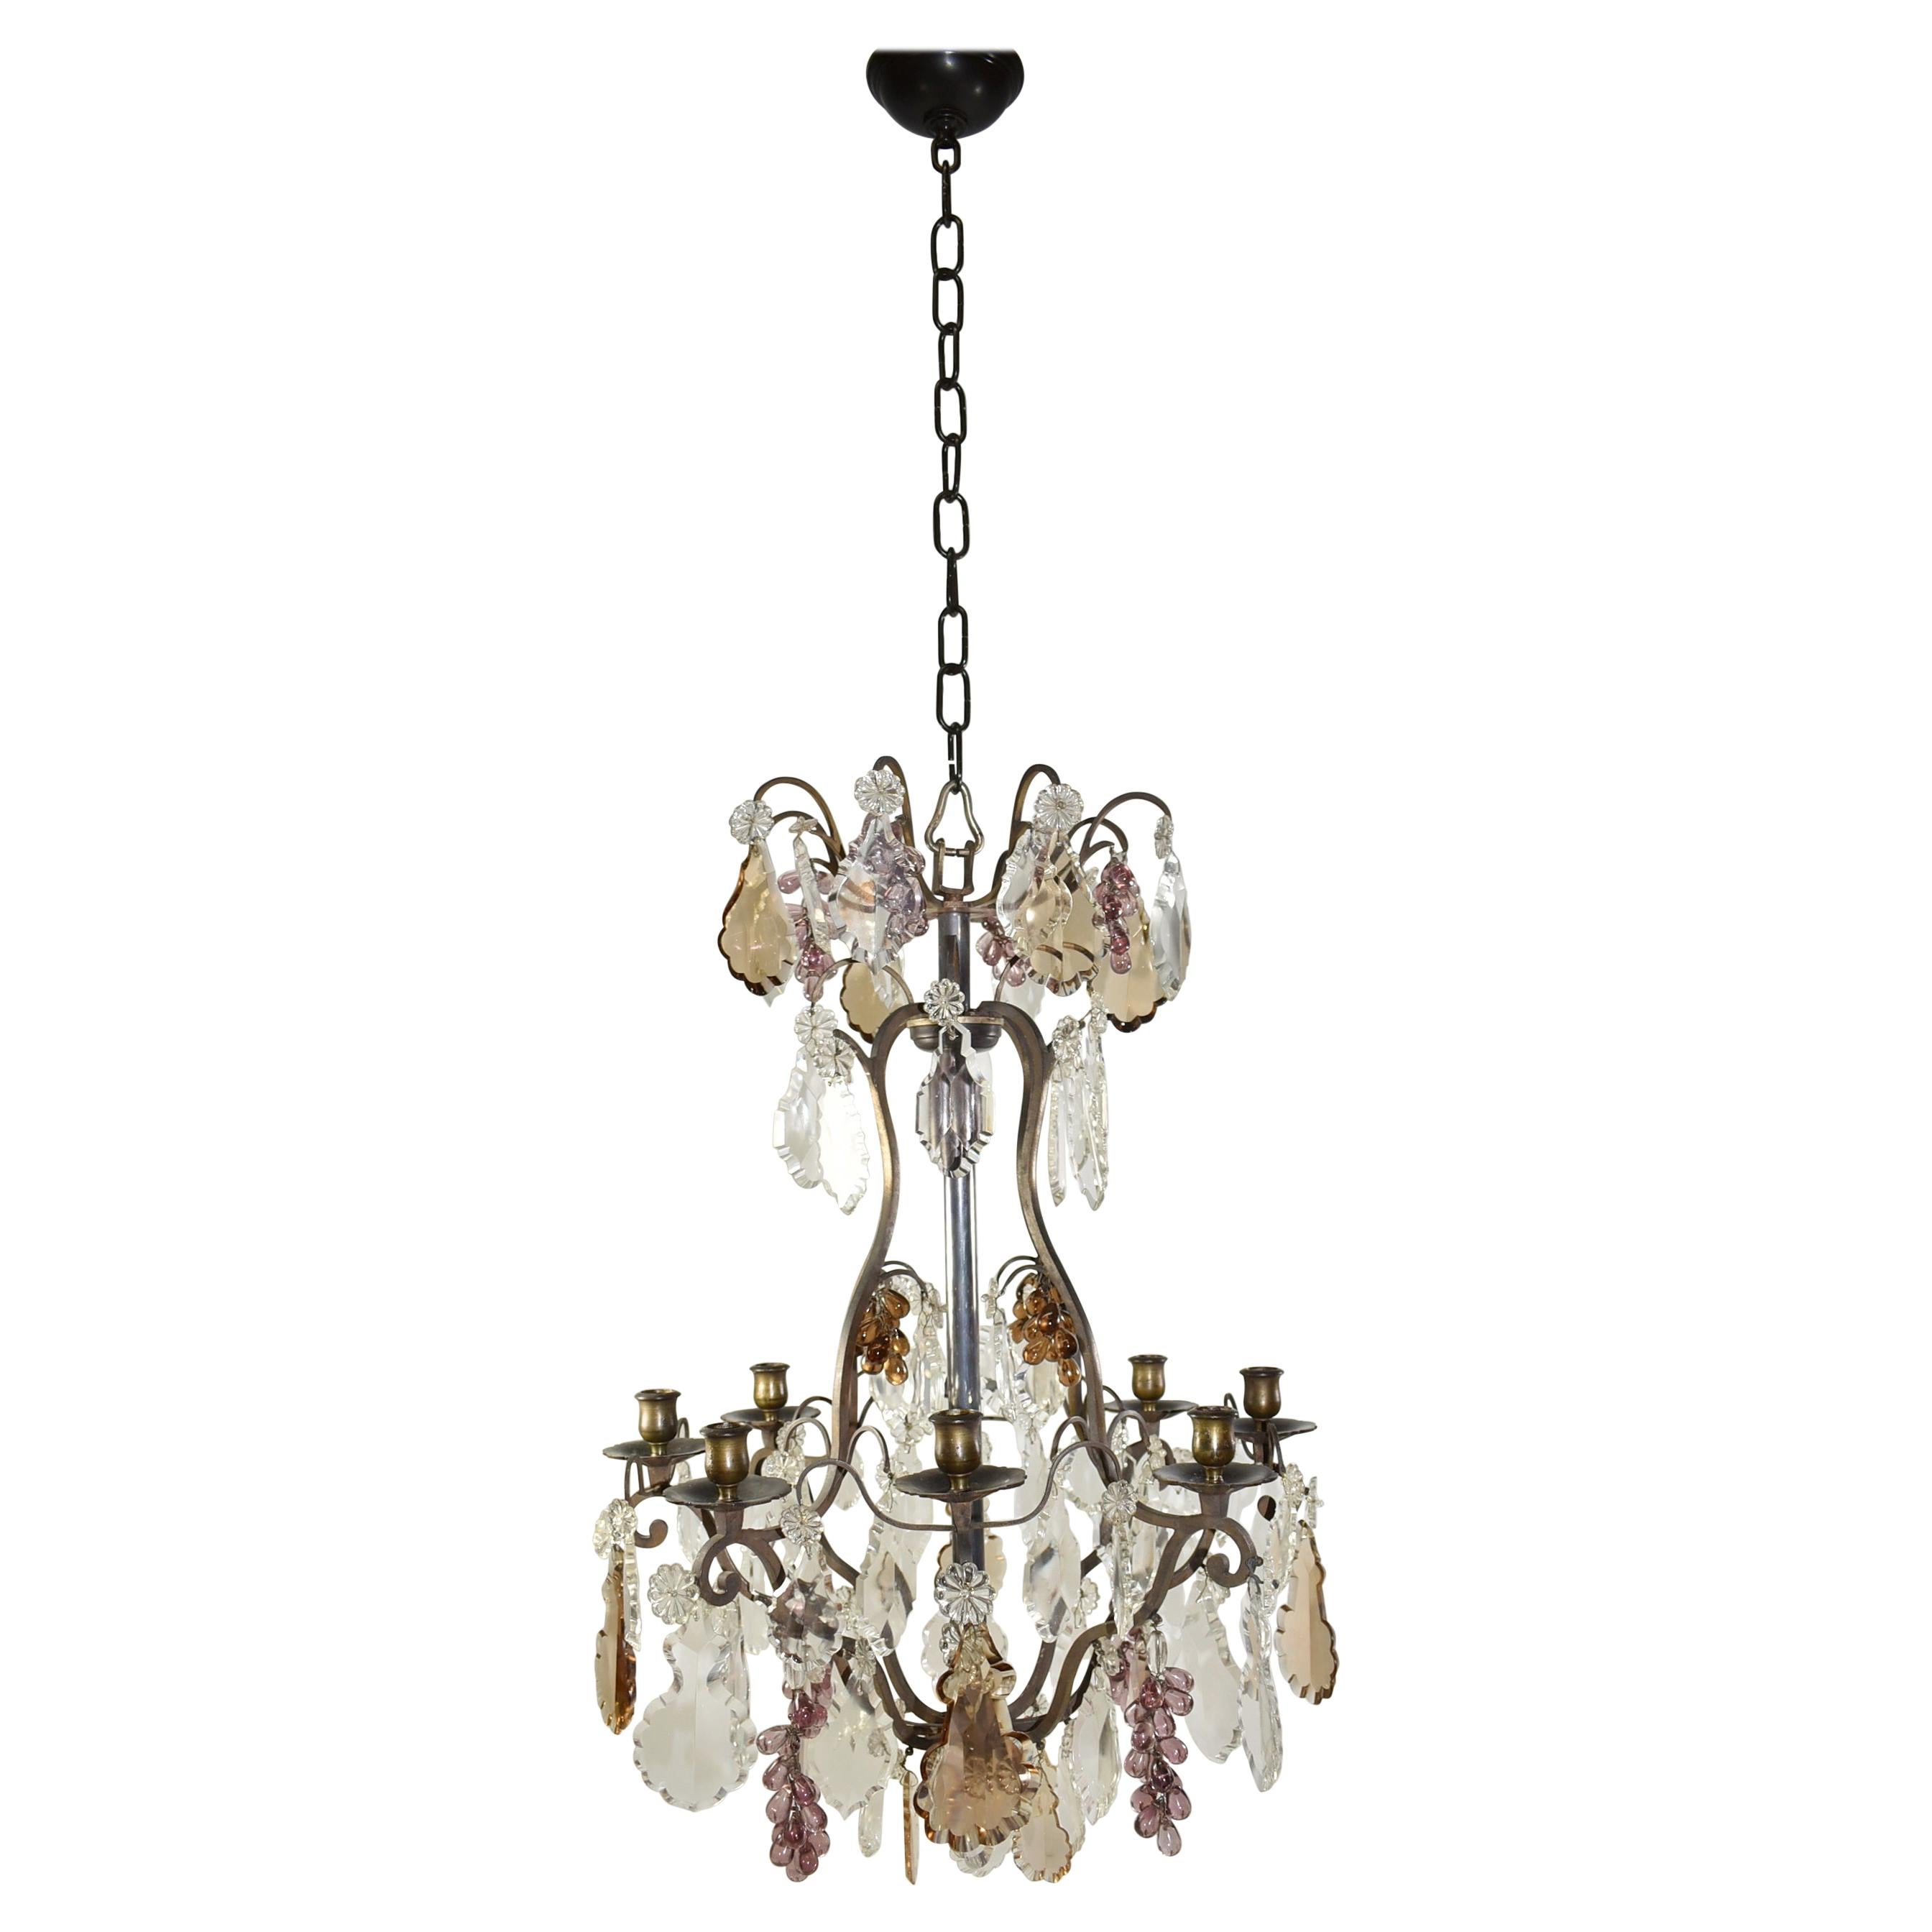 Italian Genovese Candle Chandelier Bronze Frame Crystal Flowers & Grapes 8 Arm For Sale